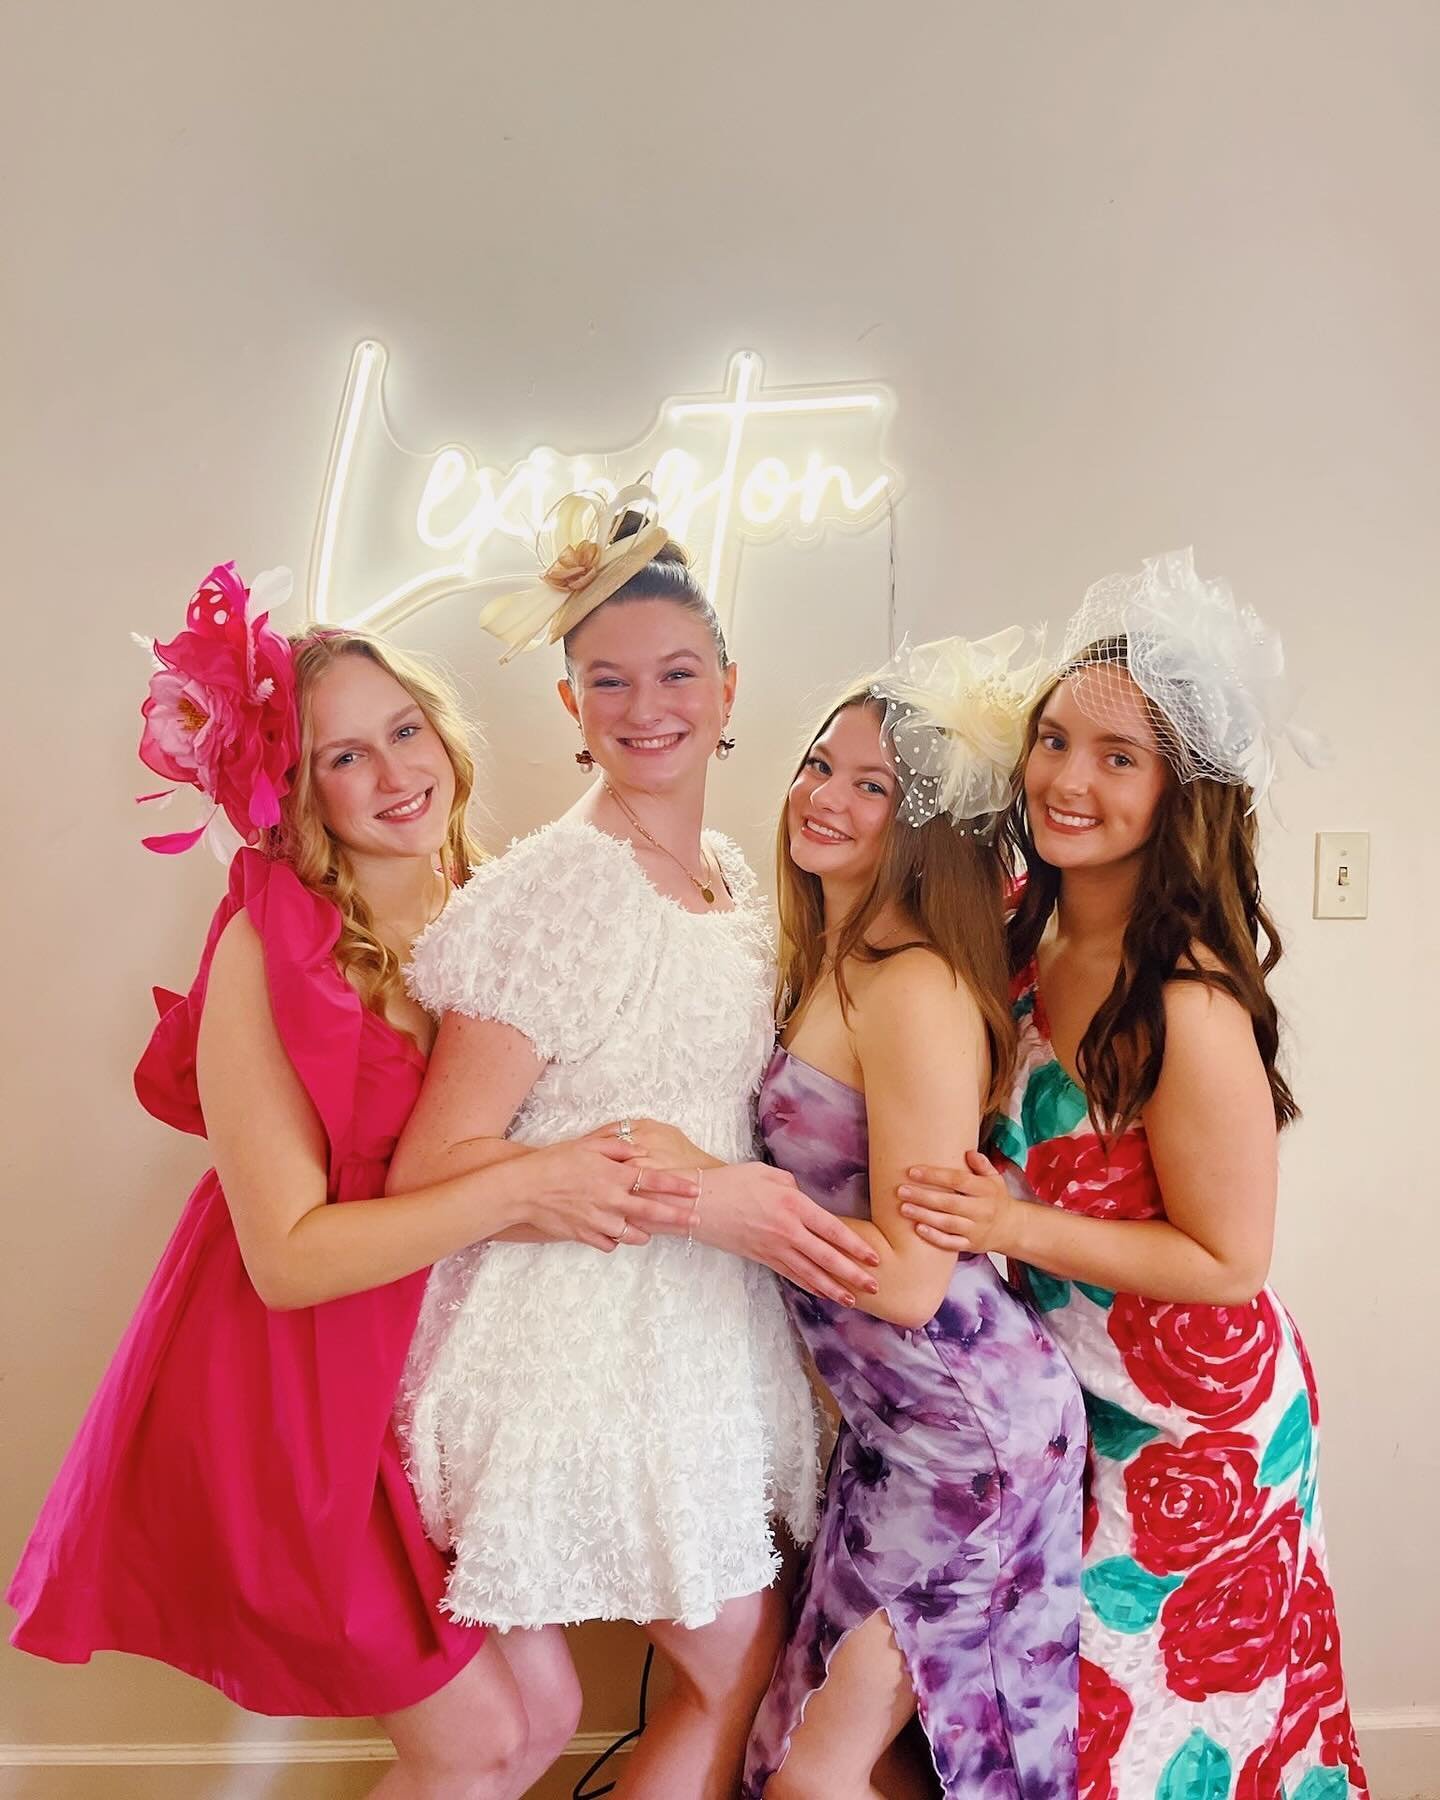 Celebrating the 150th Kentucky Derby in style 💗